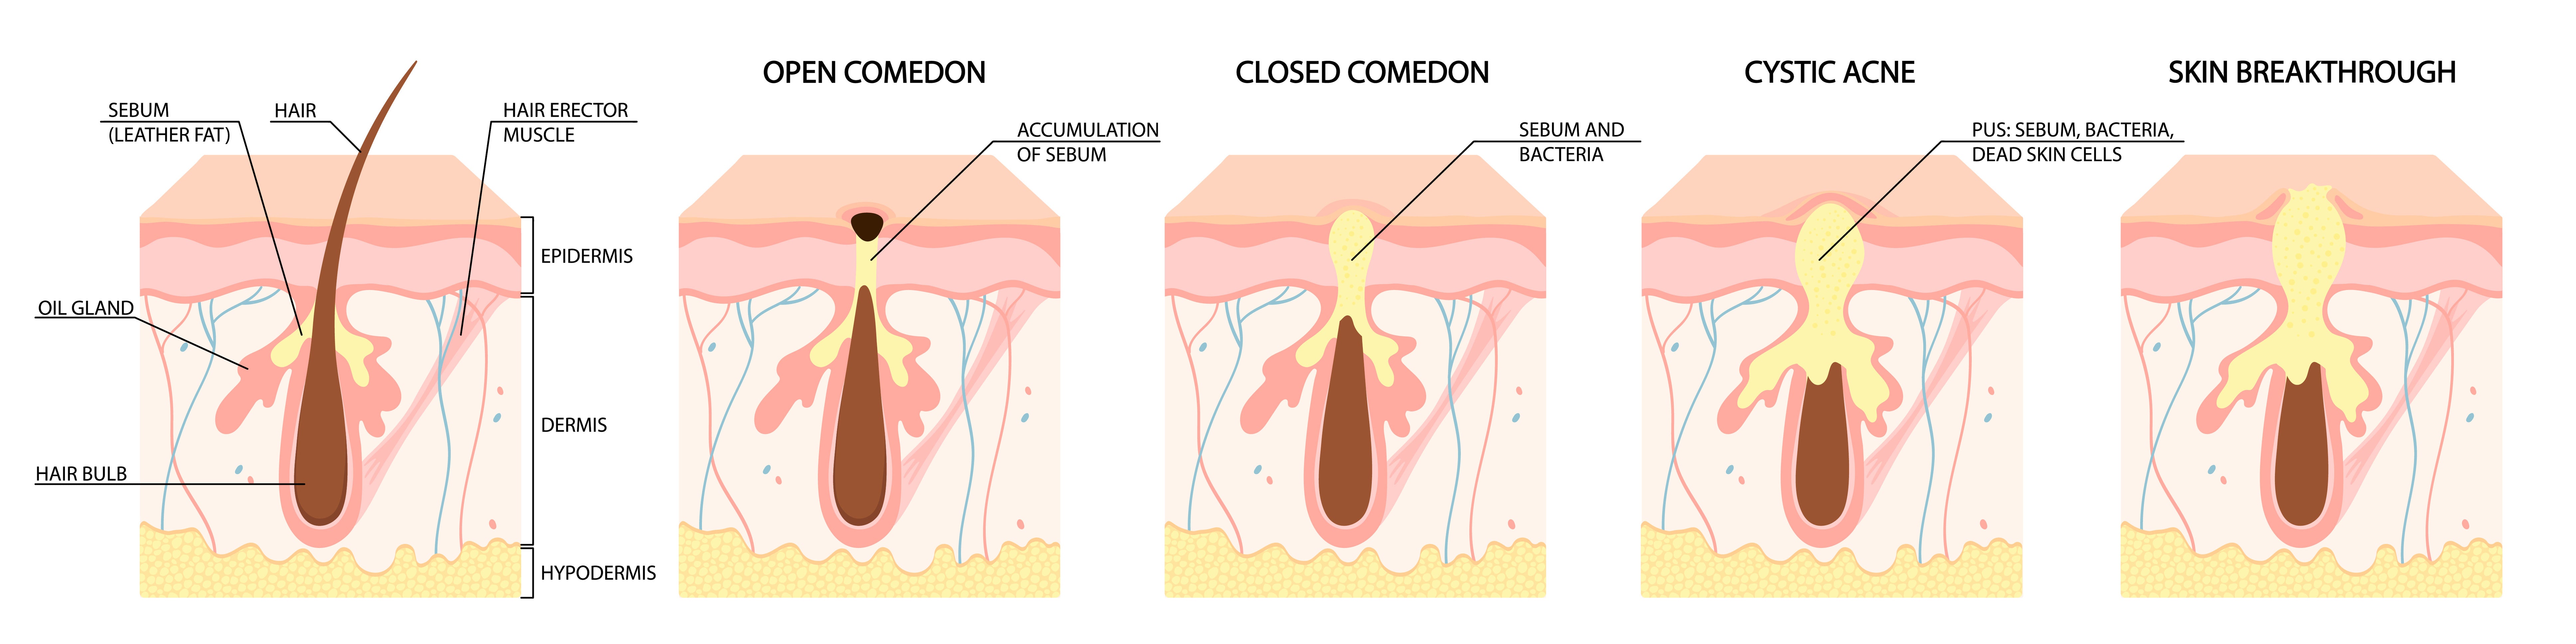 labeled diagram showing types of acne, including open comedones, closed comedones, inflammatory acne, and cystic acne etc